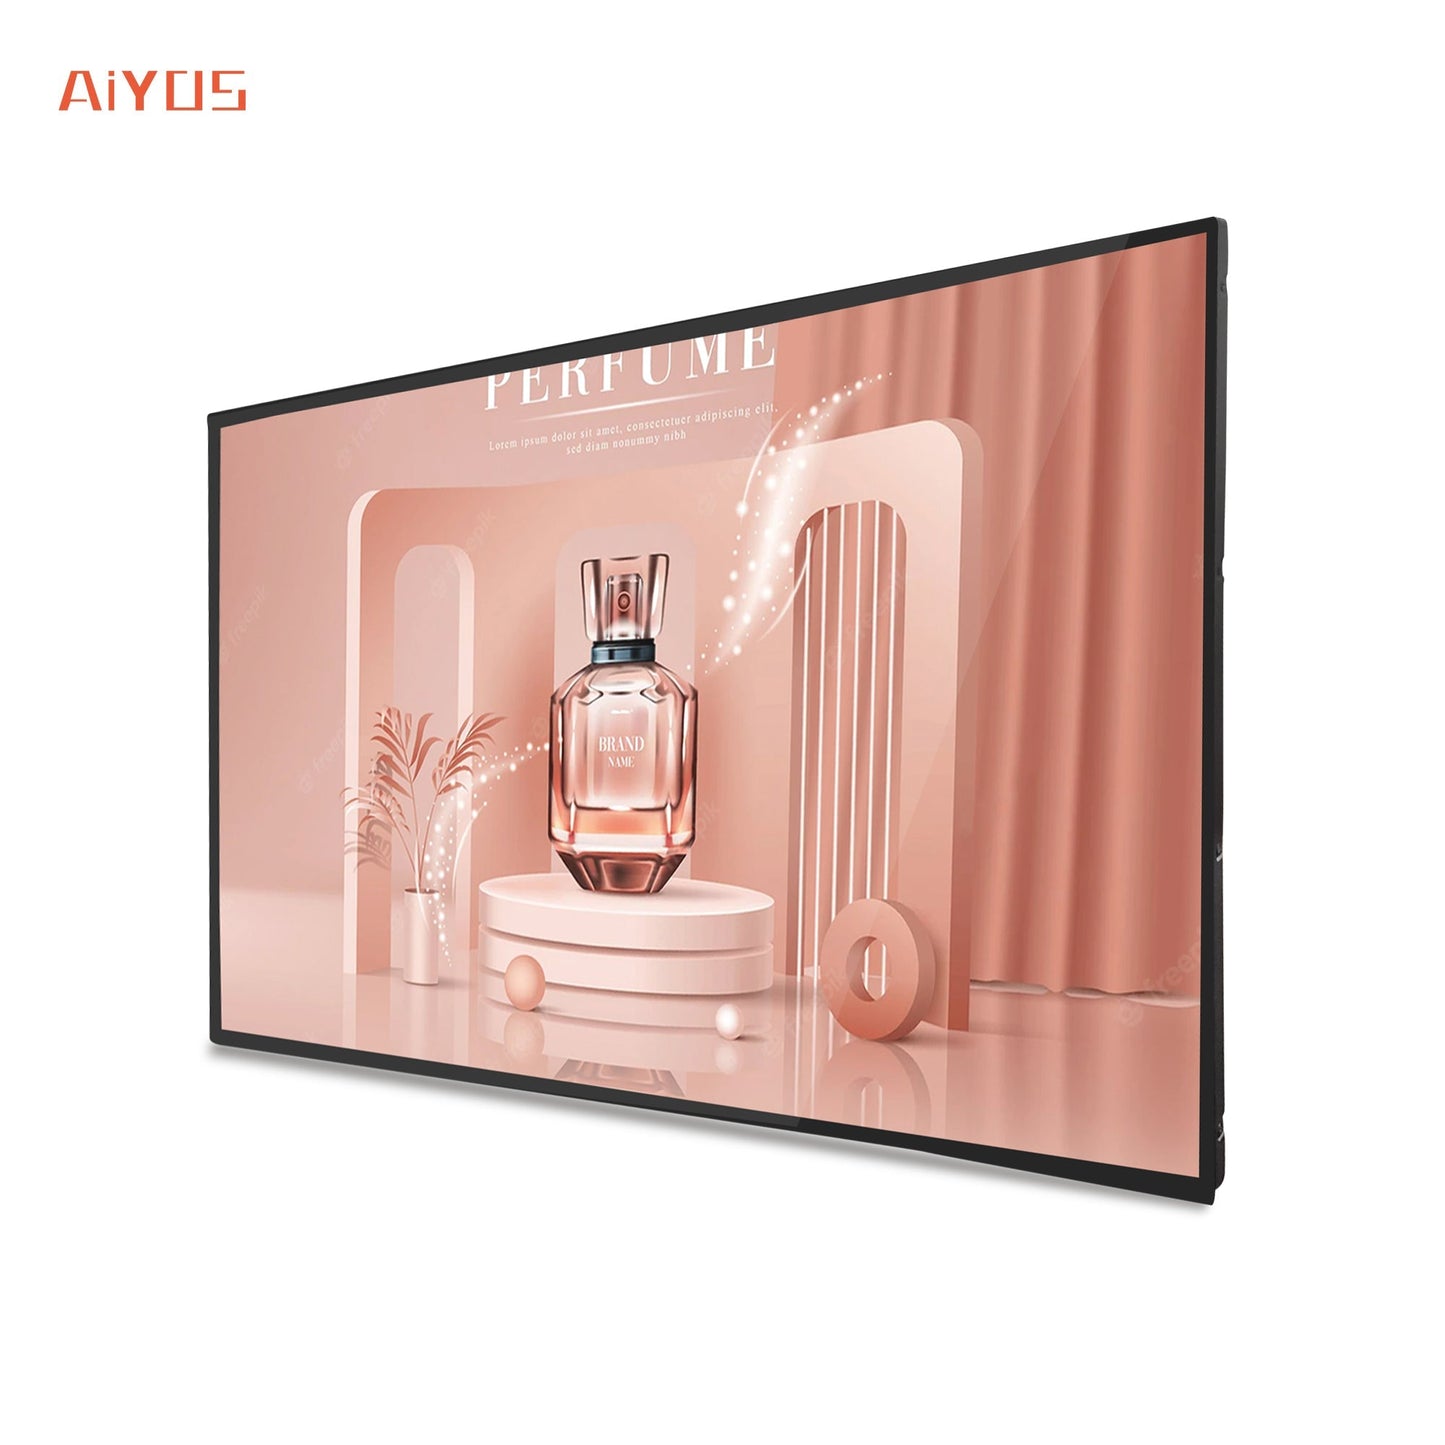 32 Inch Ceiling Mount Touch Screens Menu Board Ultra Thin Bezel TV Digital Signage Advertising Display